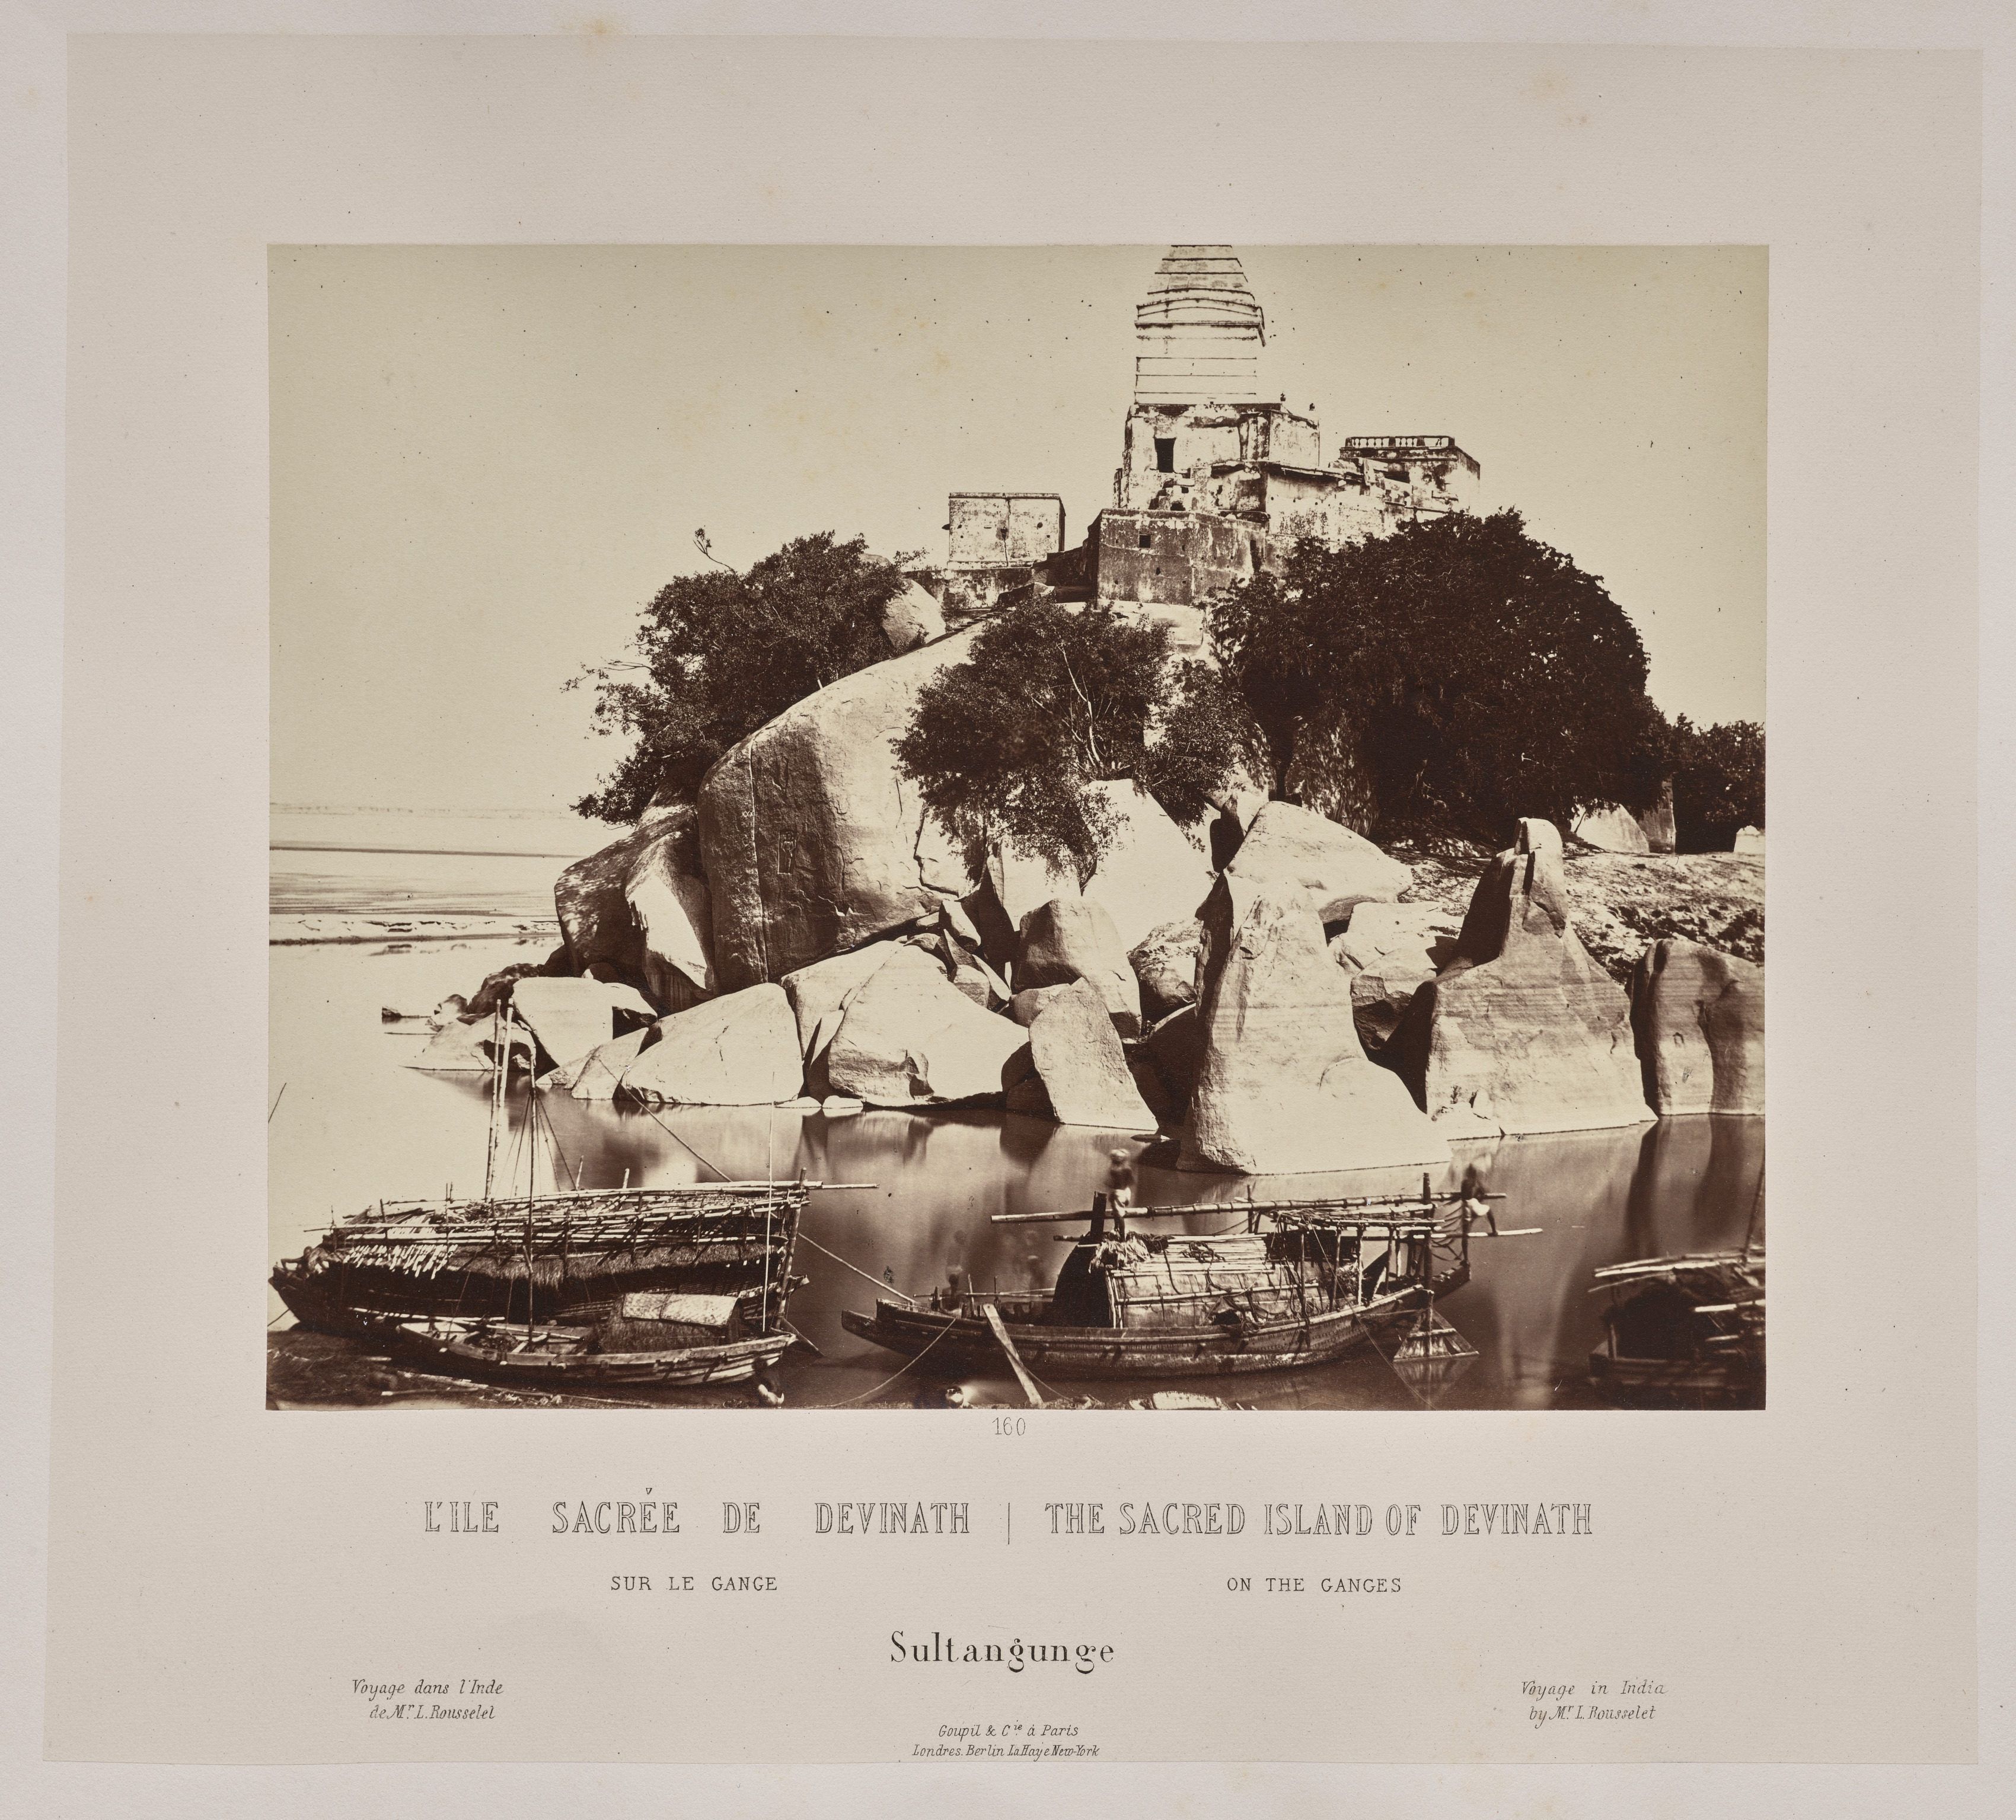 The Sacred Island of Devinath on the Ganges, Sultangunge